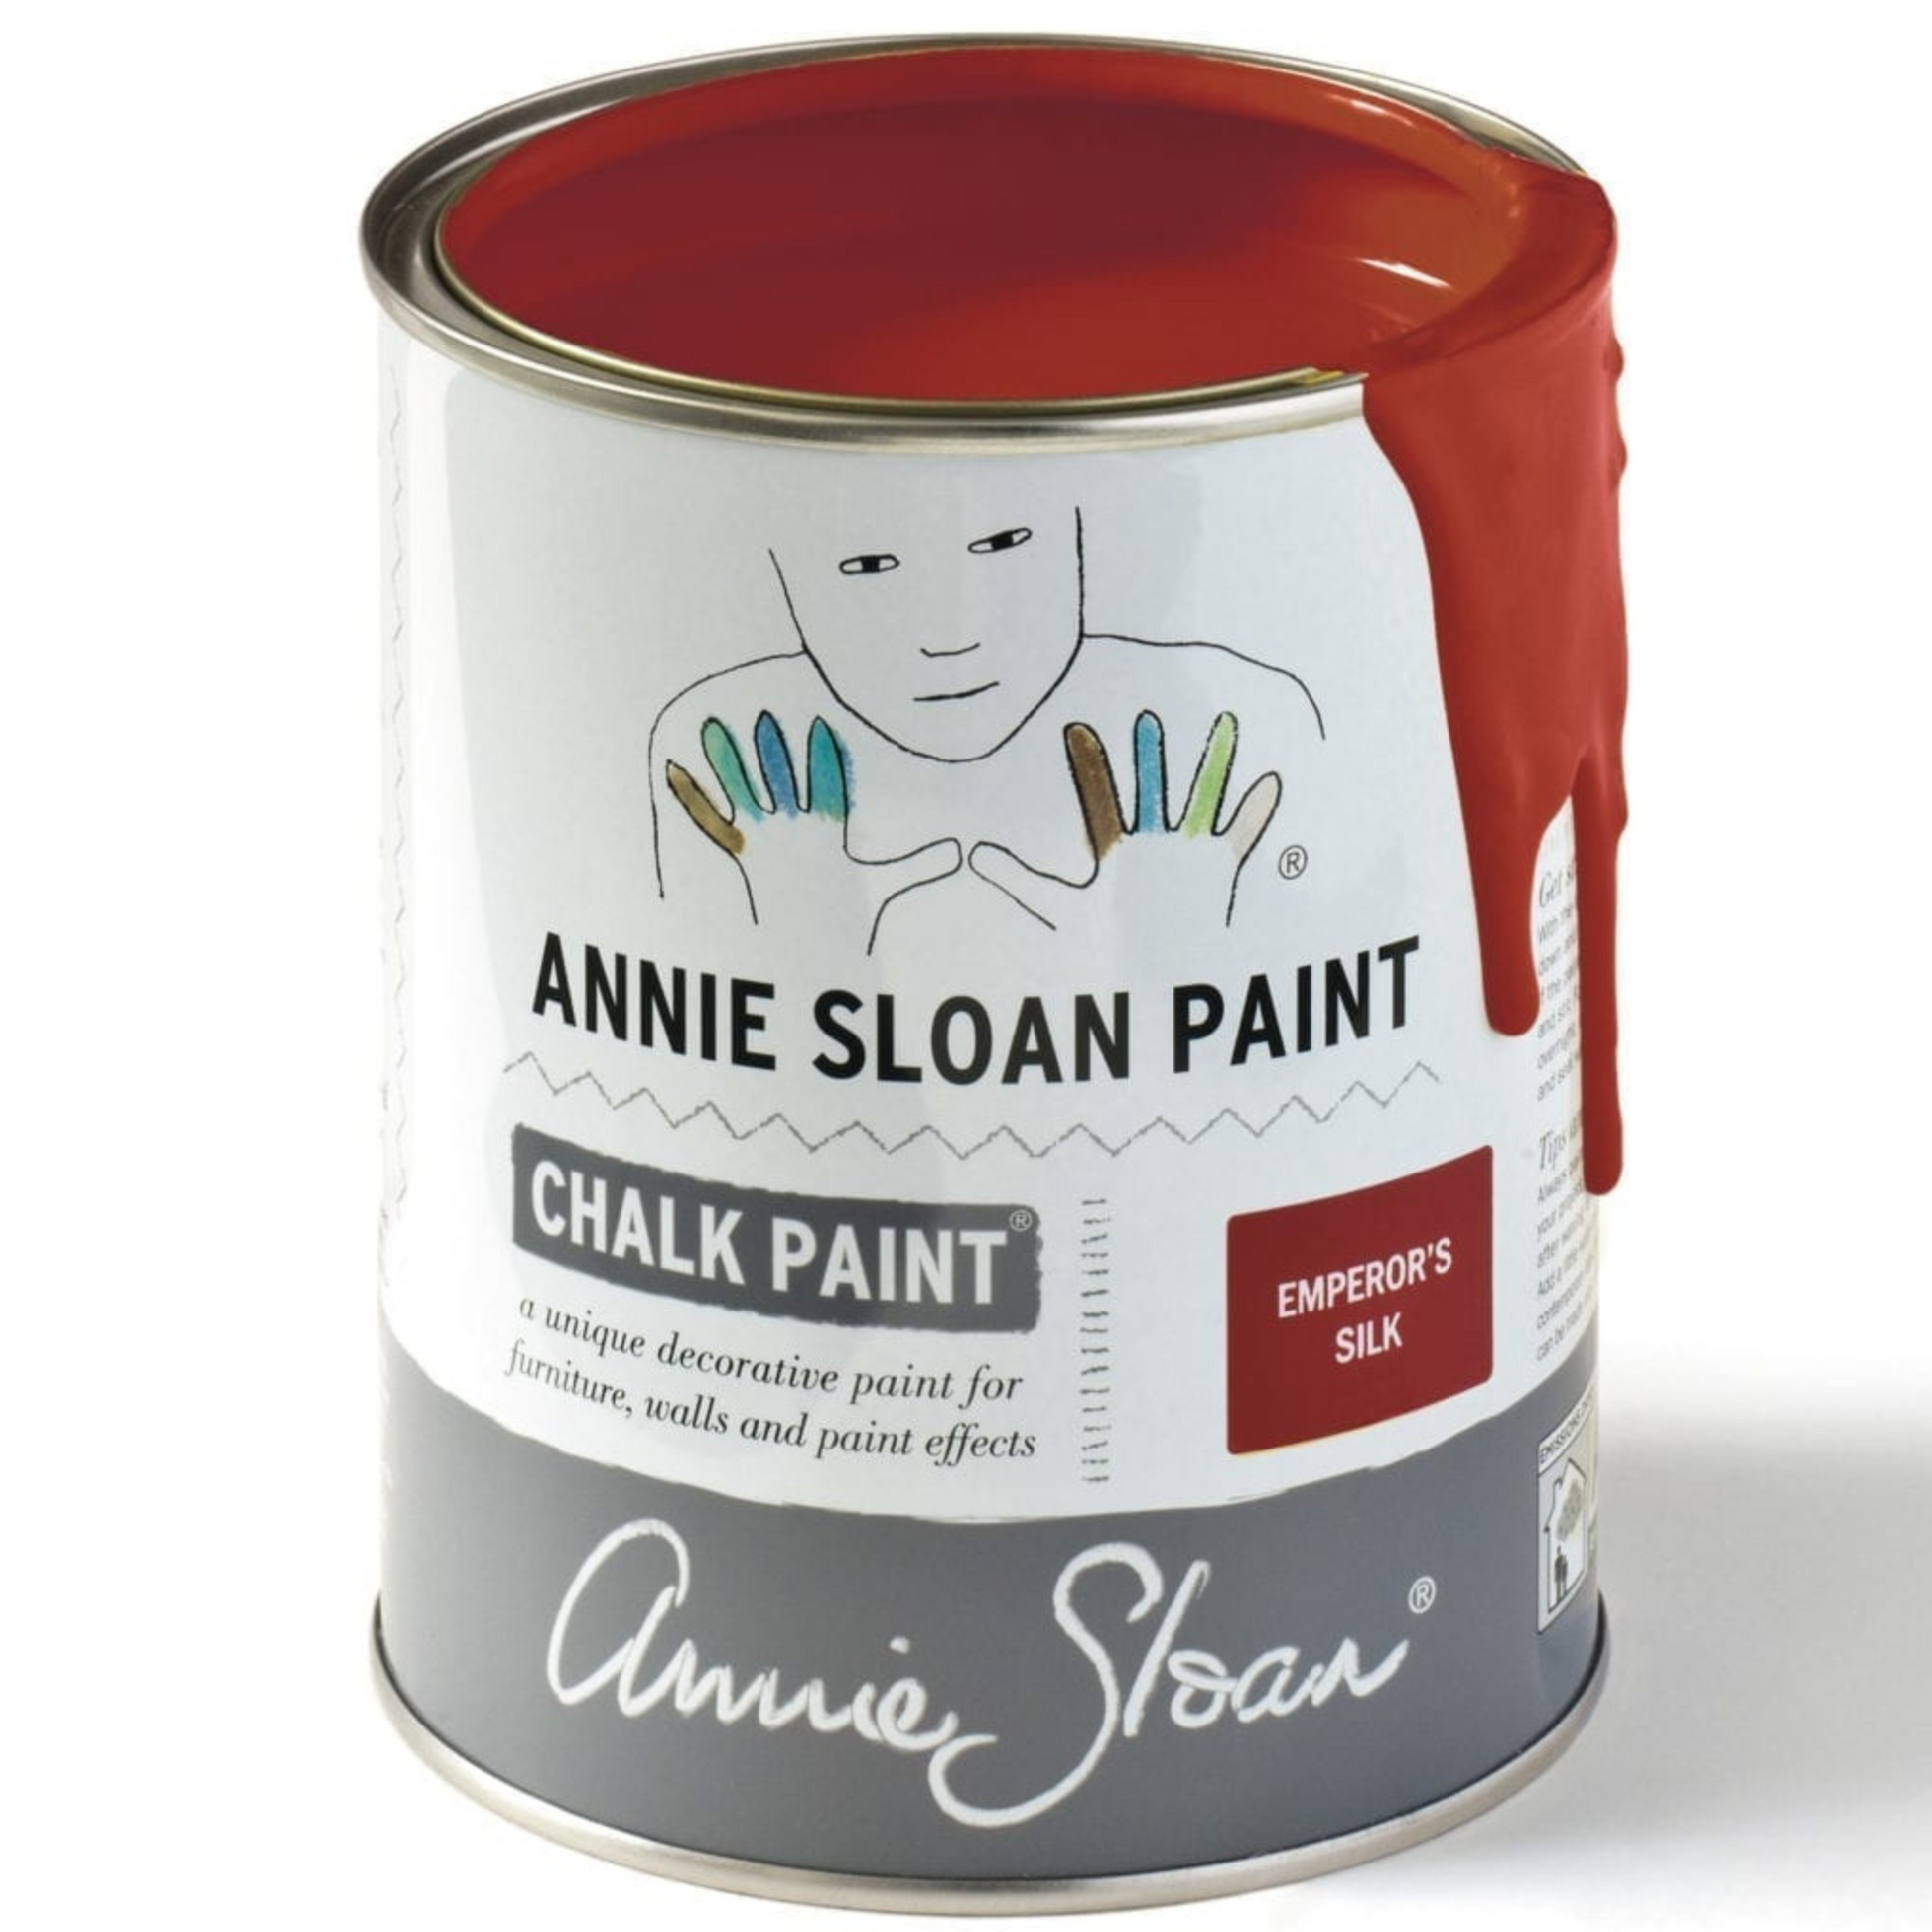 Can of Emperor's Silk Annie Sloan Chalk Paint